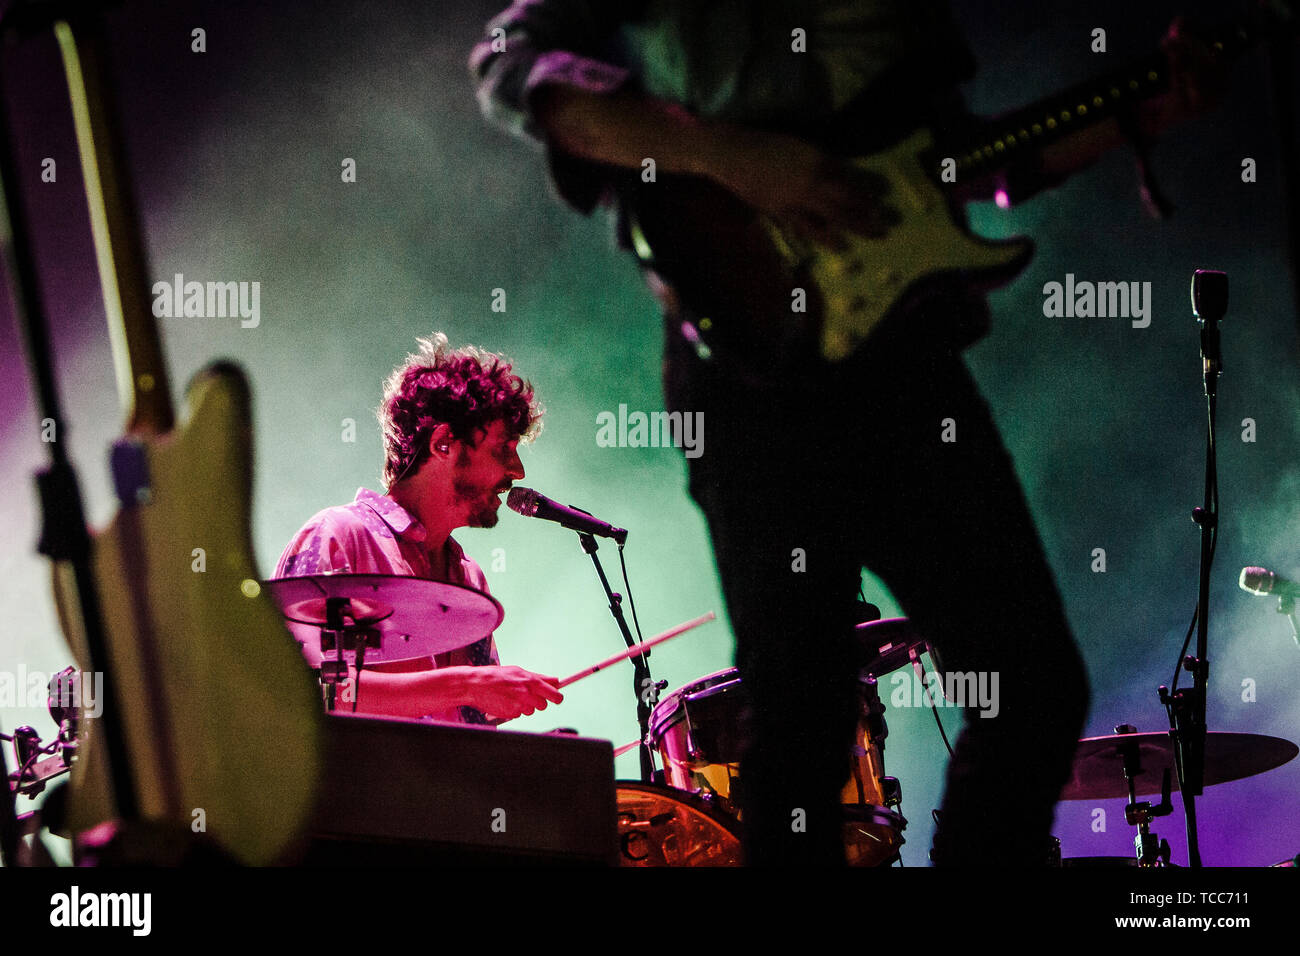 Aarhus, Denmark. 06th June, 2019. Denmark, Aarhus - June 6, 2019. The Australian musical project Tame Impala performs a live concert during the Danish music festival Northside 2019 in Aarhus. Here drummer Julien Barbagallo is seen live on stage. EXCLUDING DENMARK (Photo Credit: Gonzales Photo/Alamy Live News Stock Photo